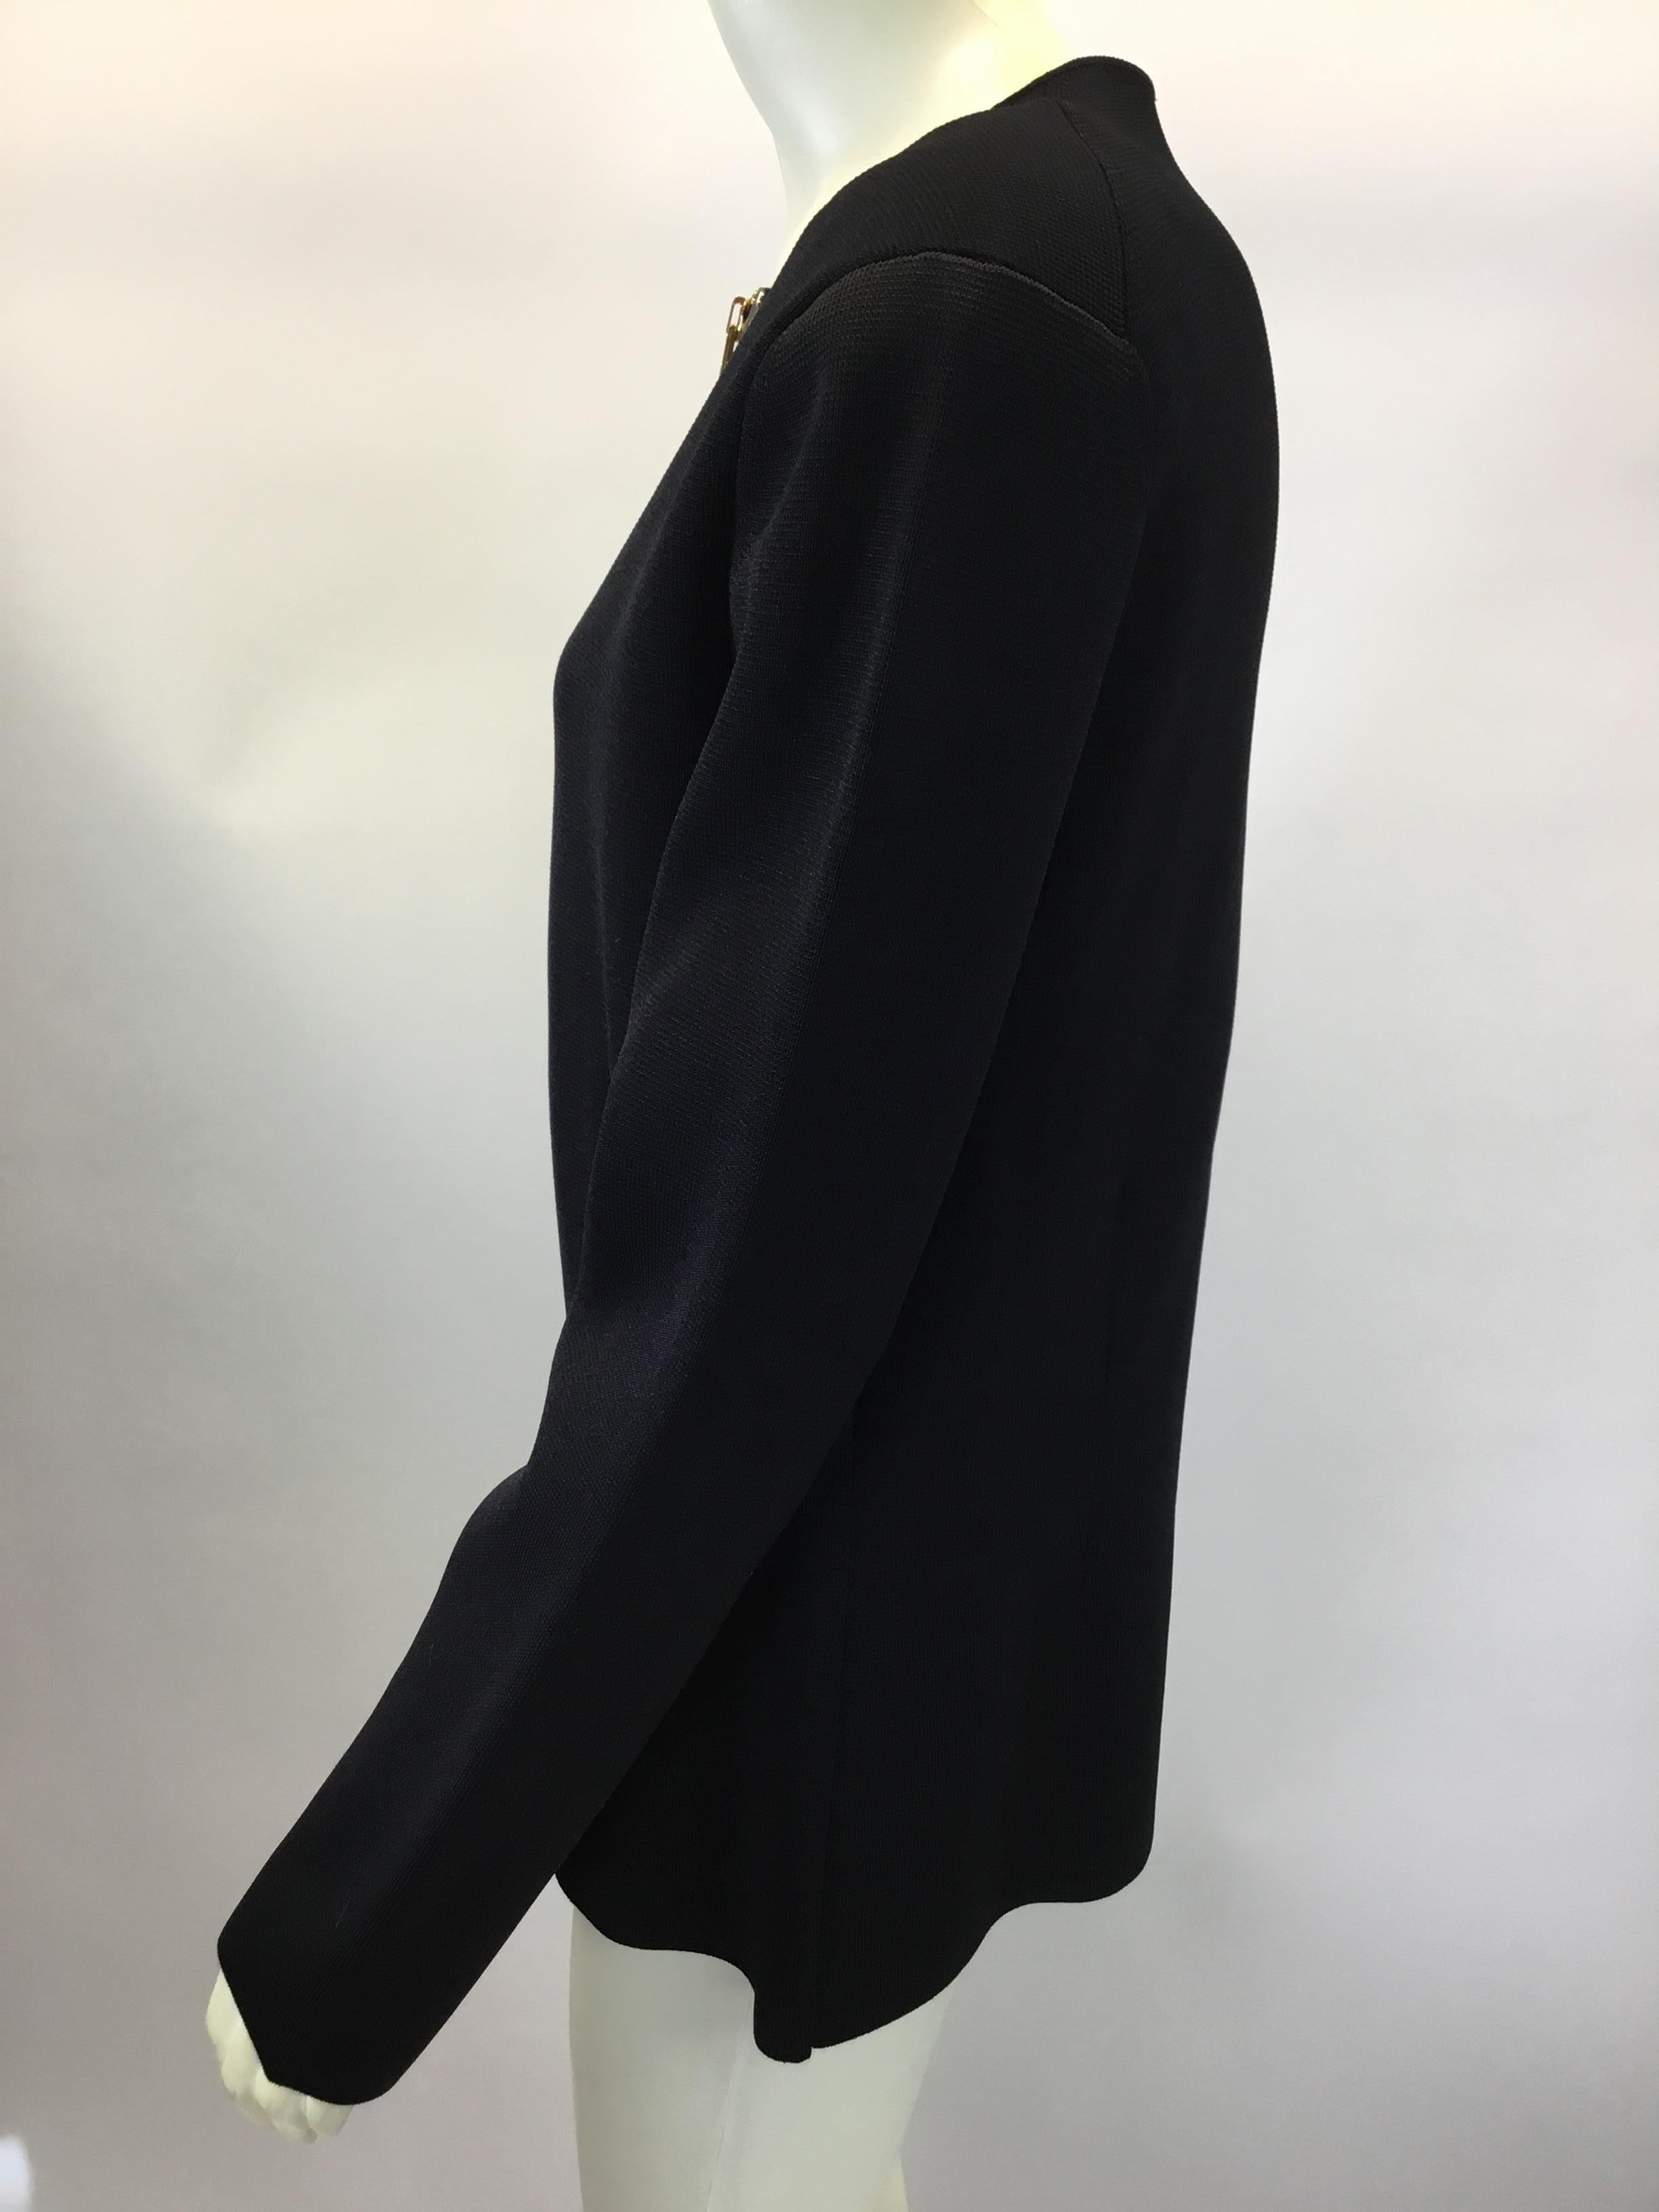 Tom Ford Black Knit Zippered Jacket 
$699
Made in Italy
94% Viscose, 6% Polyester
Leather Trim
Size 46
Length 24.5”
Bust 38”
Waist 33”